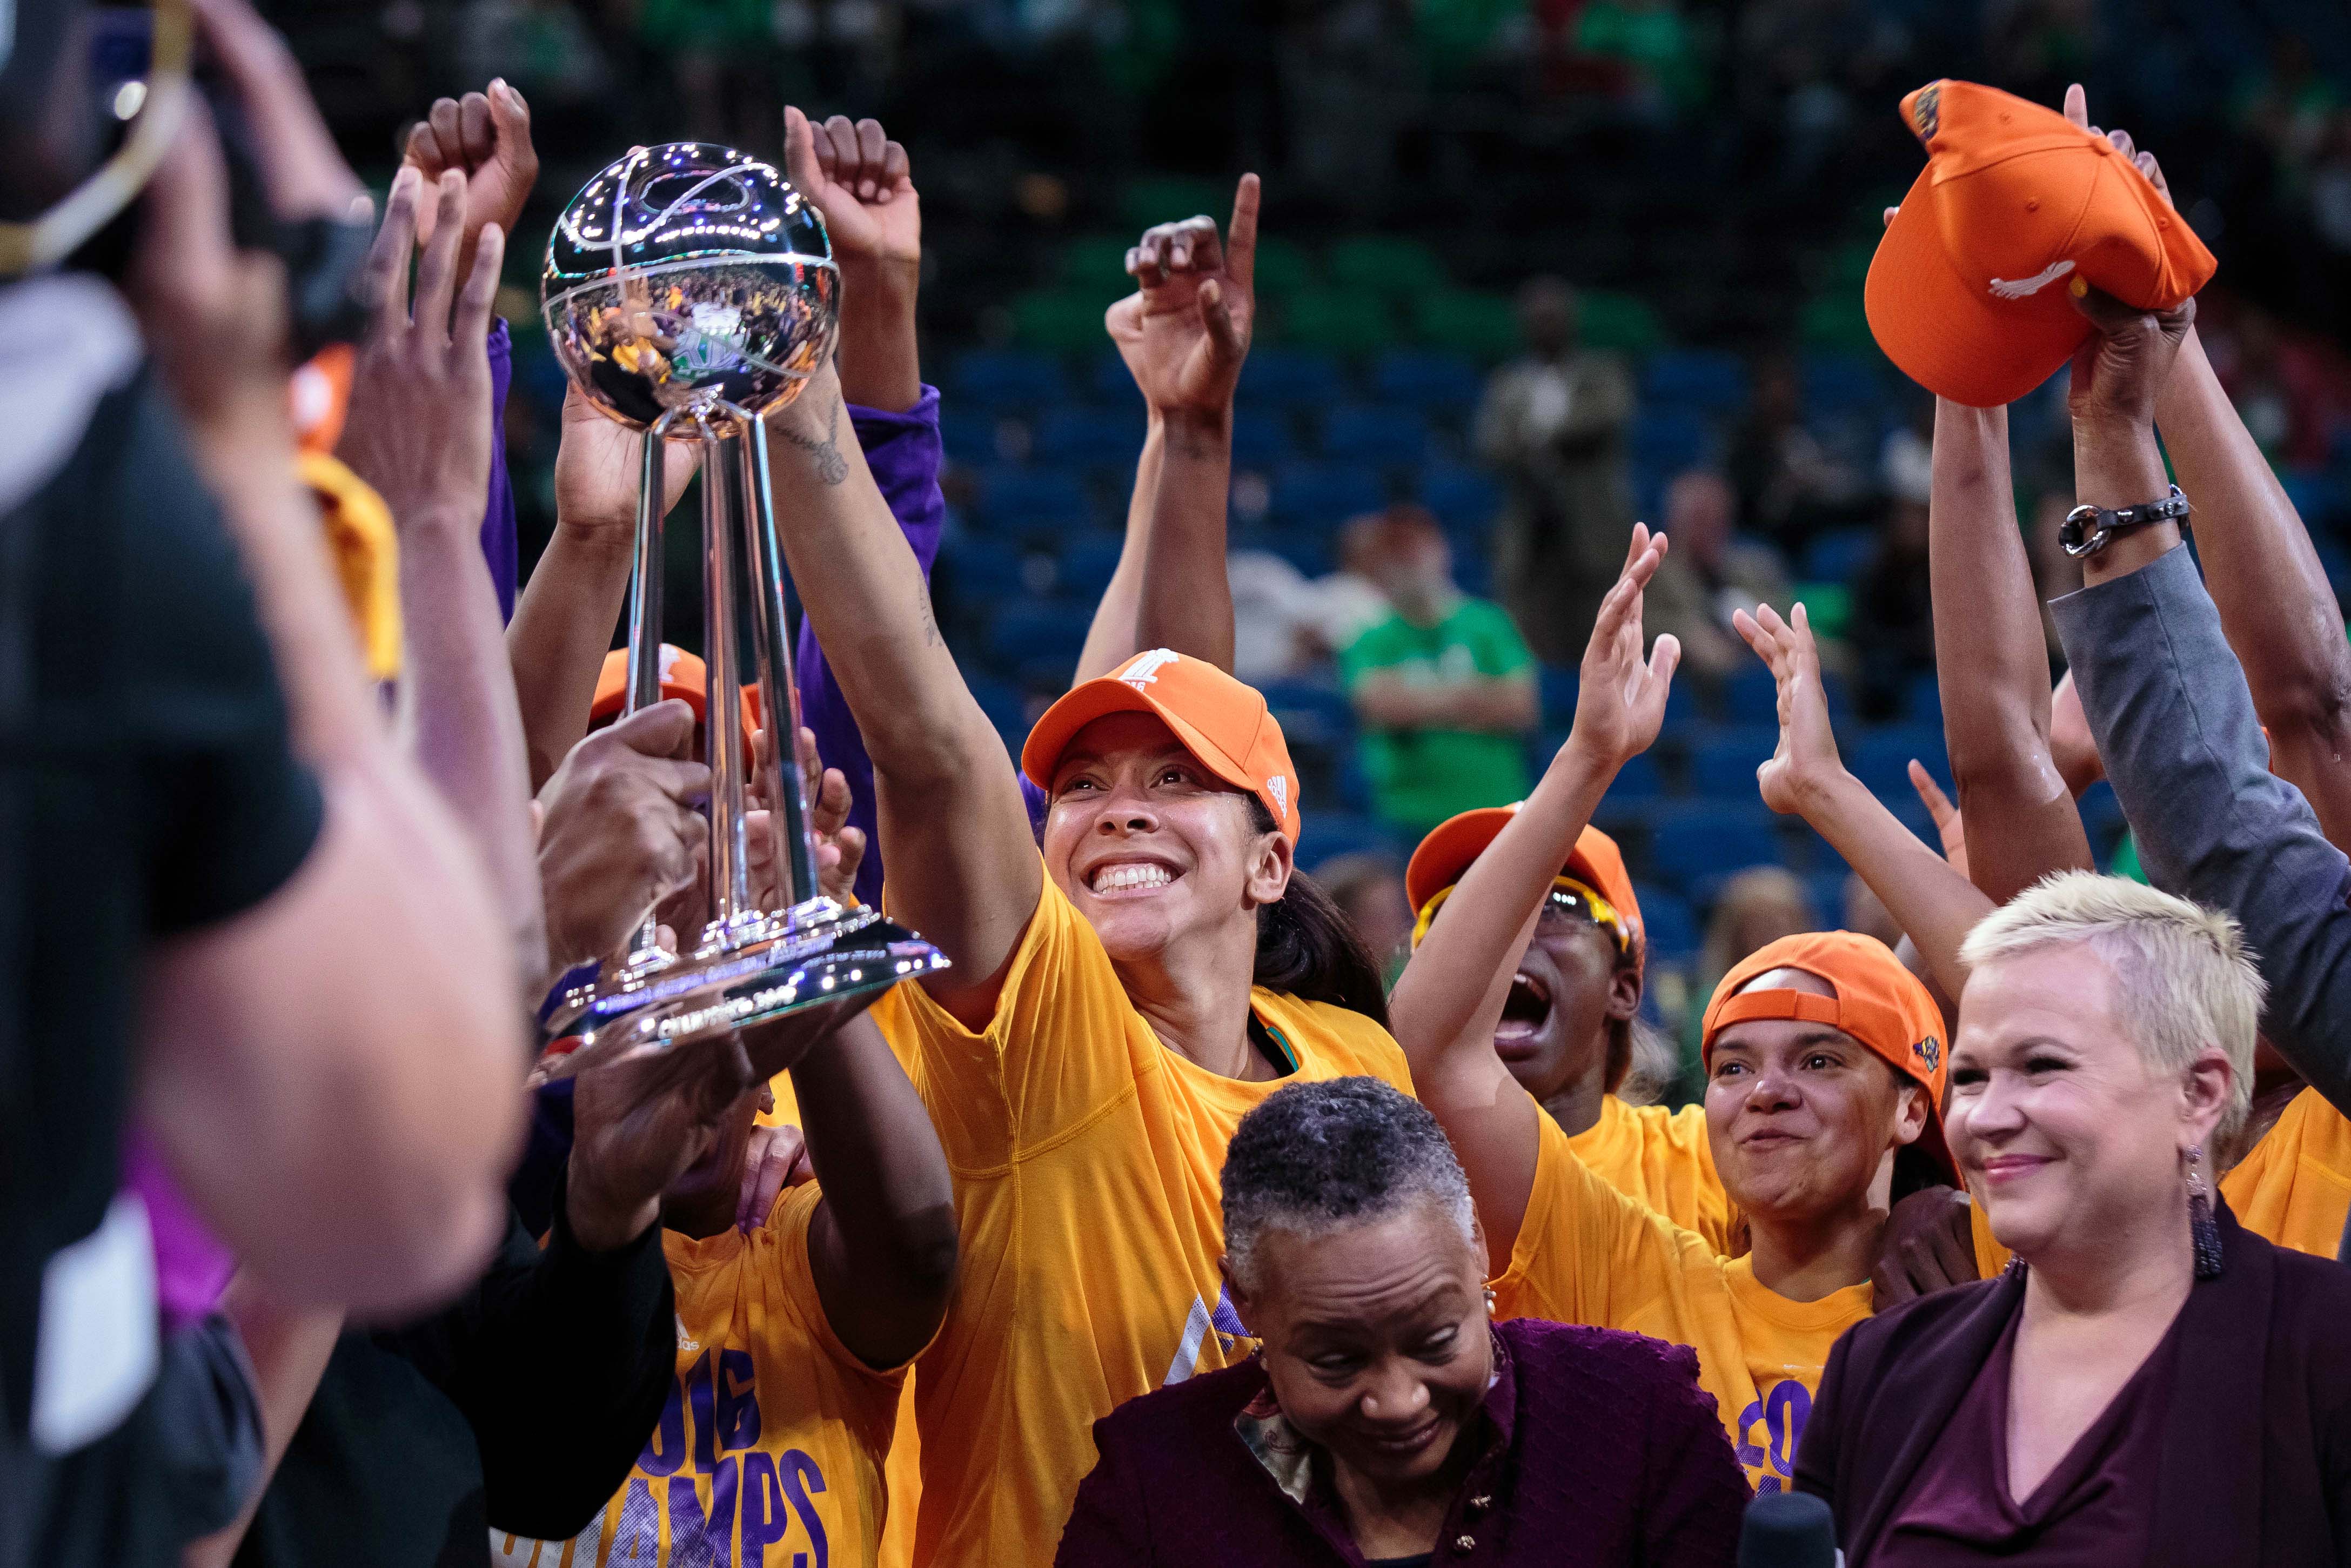 This is for Pat - Candace Parker leads L.A. Sparks to WNBA title